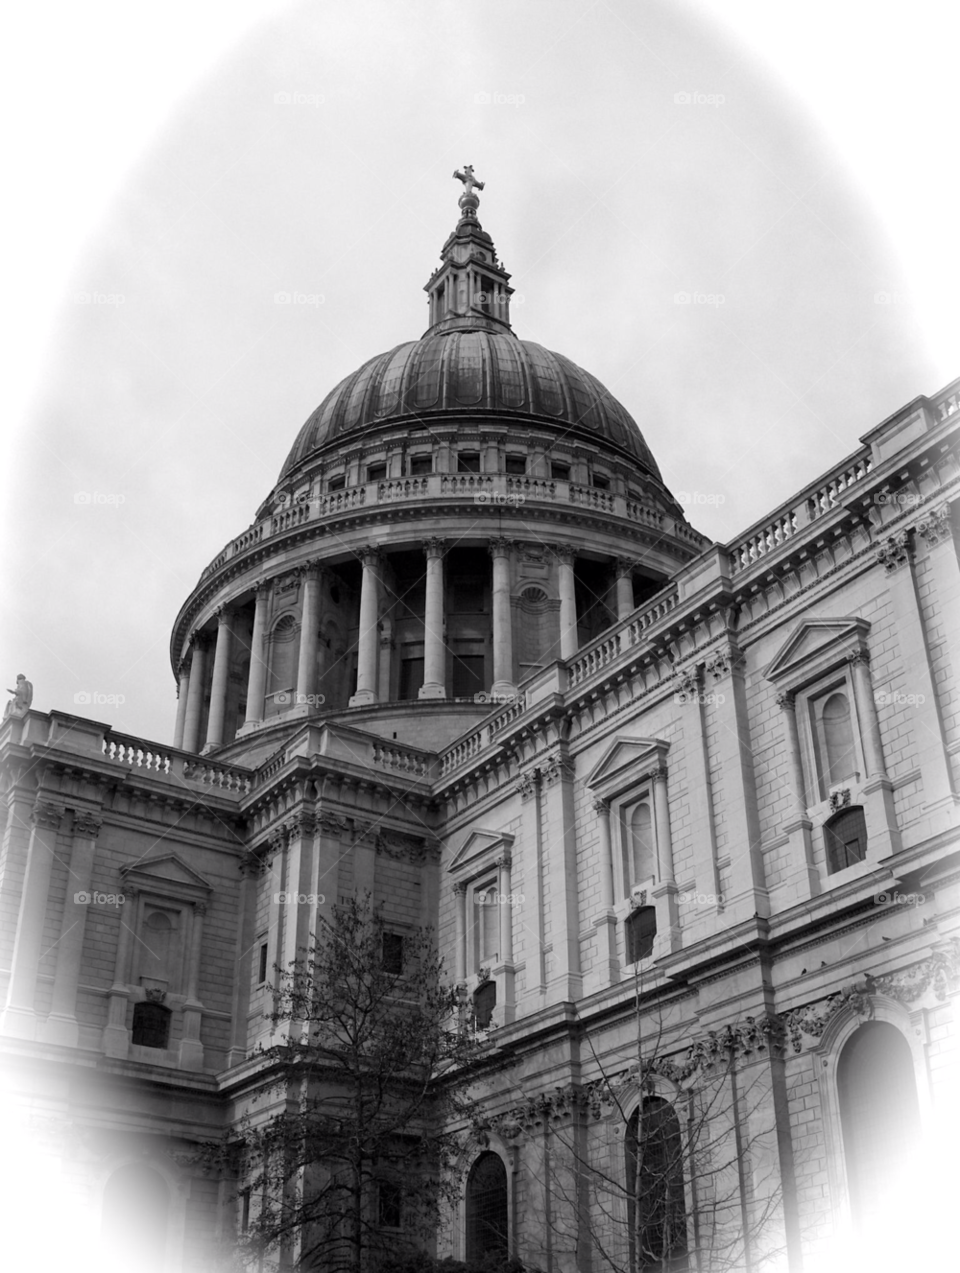 london architecture history st pauls cathedral by tommygirl-uk